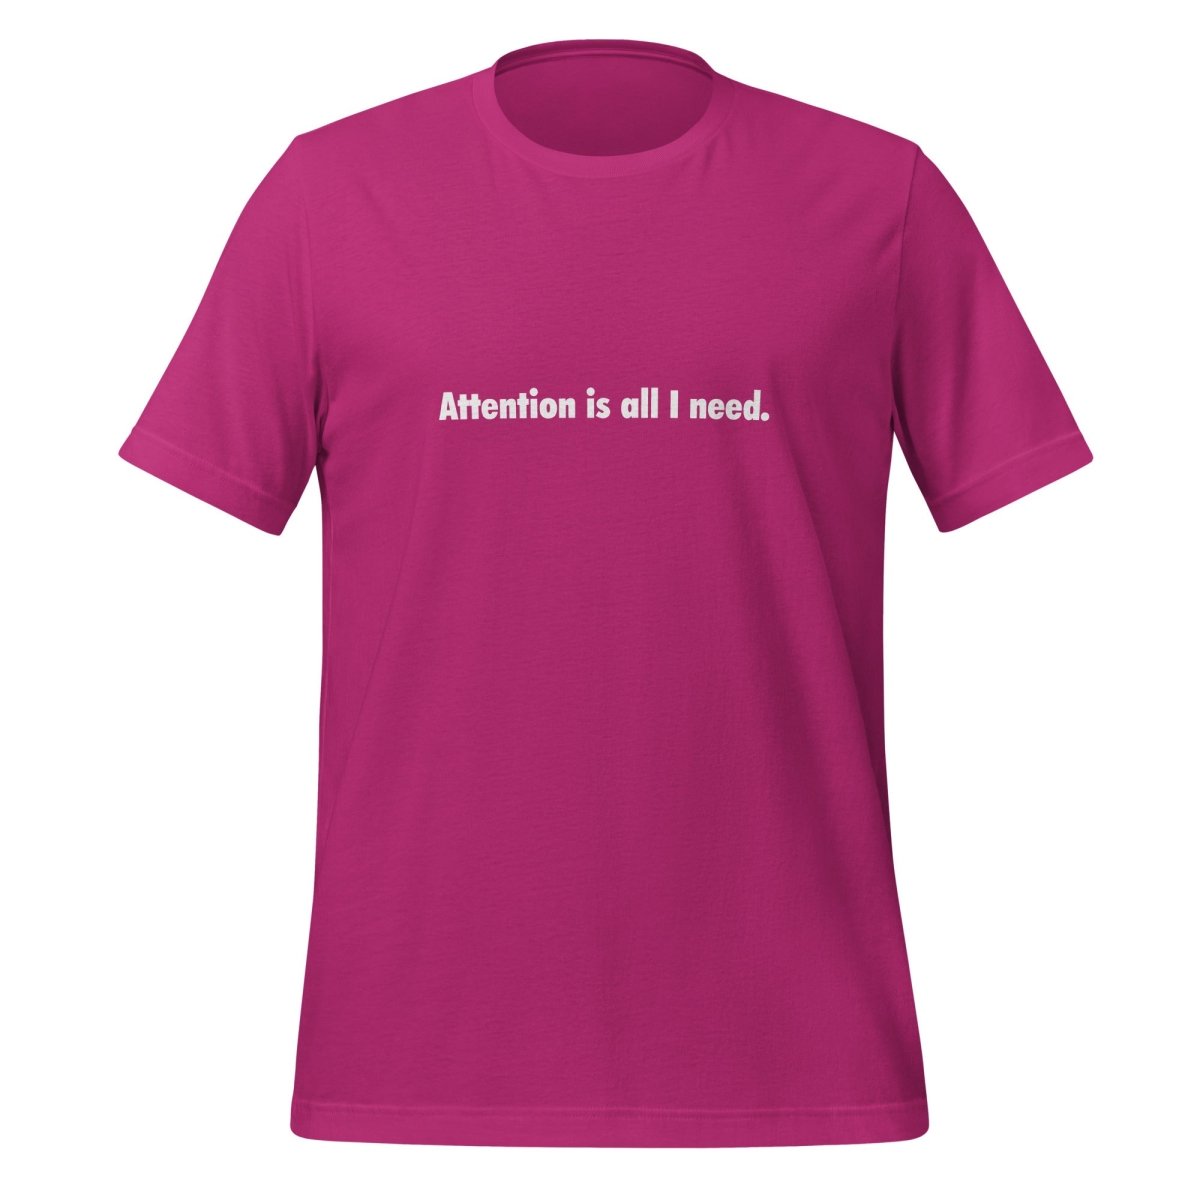 Attention is all I need. T - Shirt (unisex) - Berry - AI Store